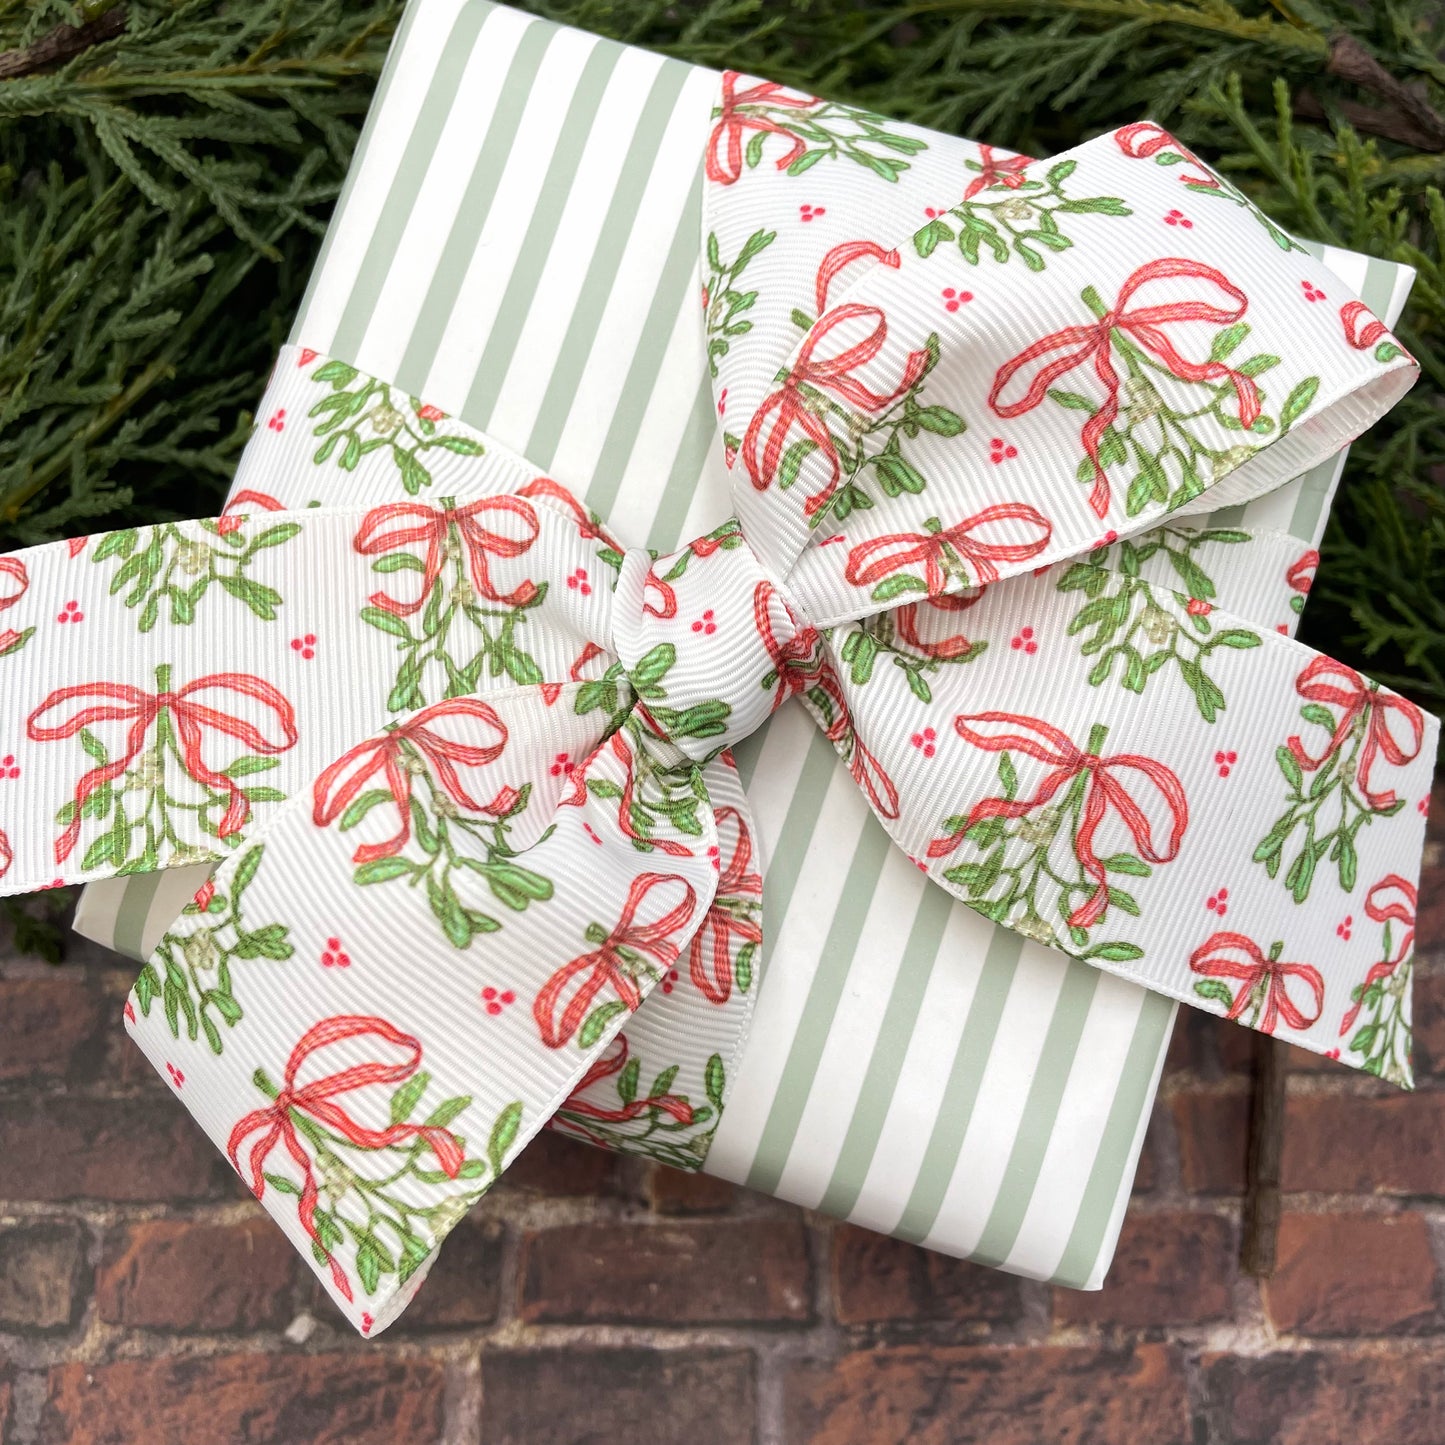 Holiday Mistletoe ribbon with delicate green mistletoe with white berries and red bows printed on 1.5" satin and grosgrain